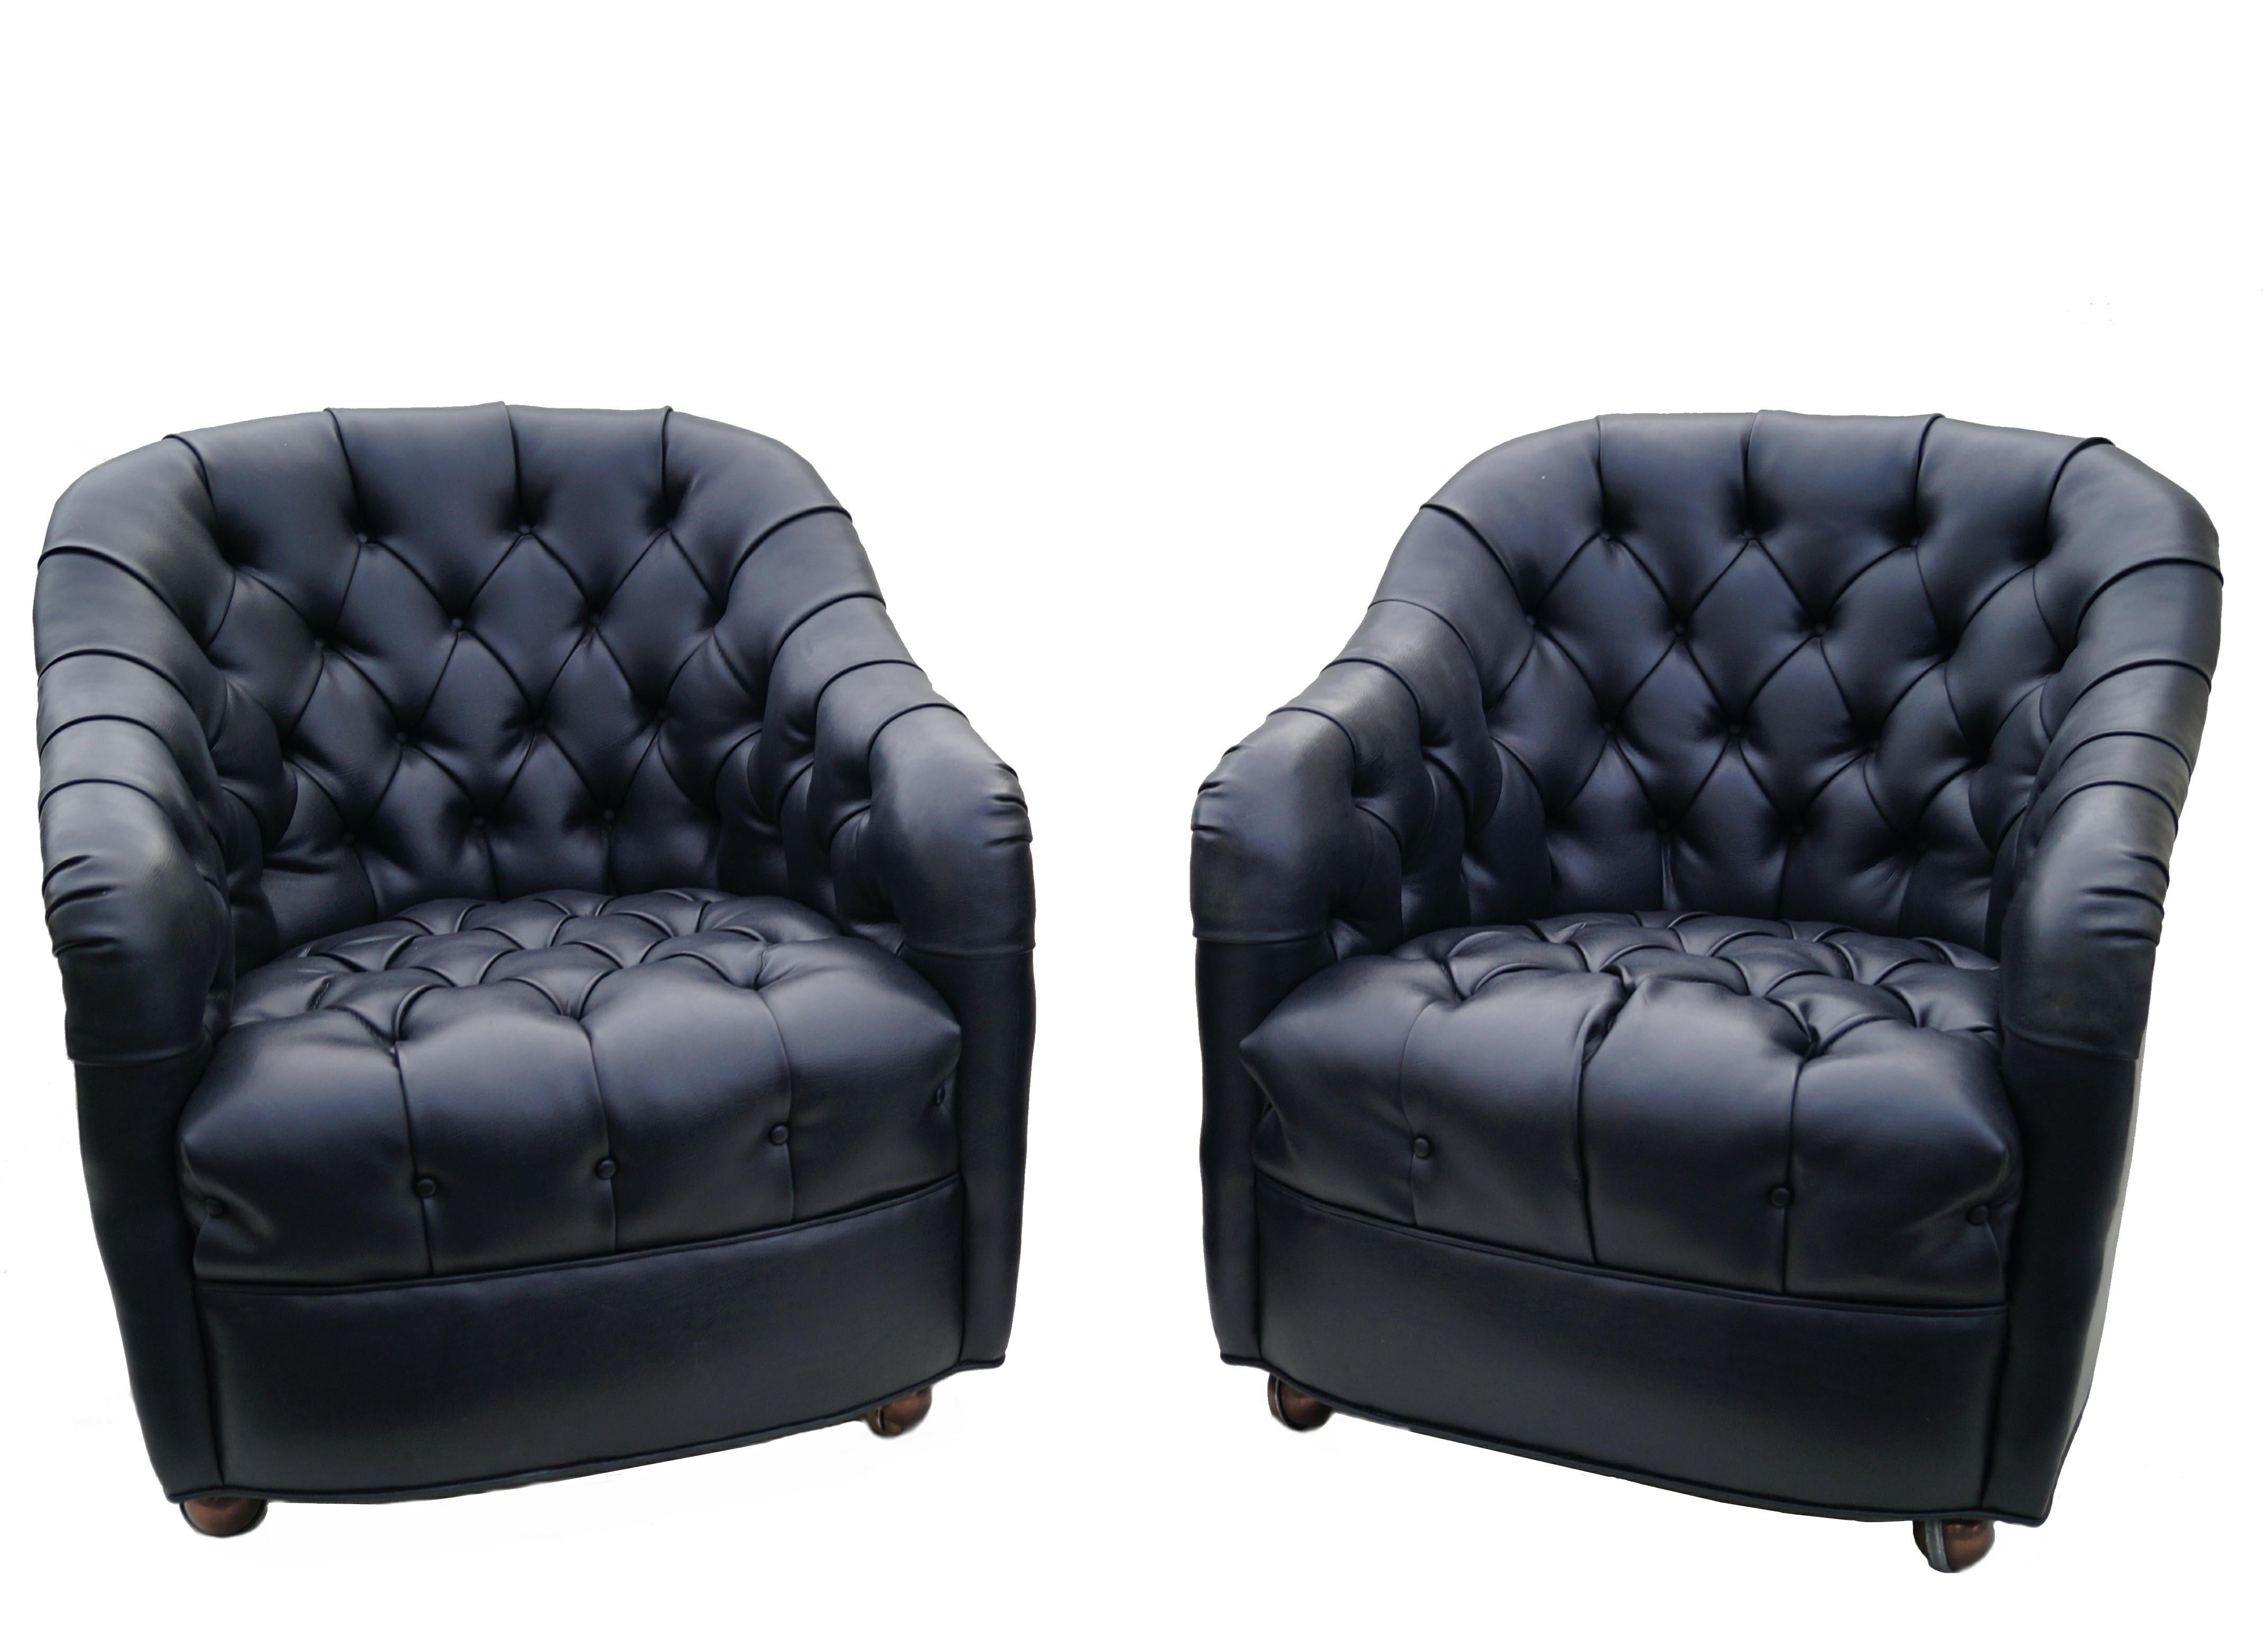 Pair of Black Mid-Century Modern Ward Bennett Style Tufted Lounge Chairs Casters 3